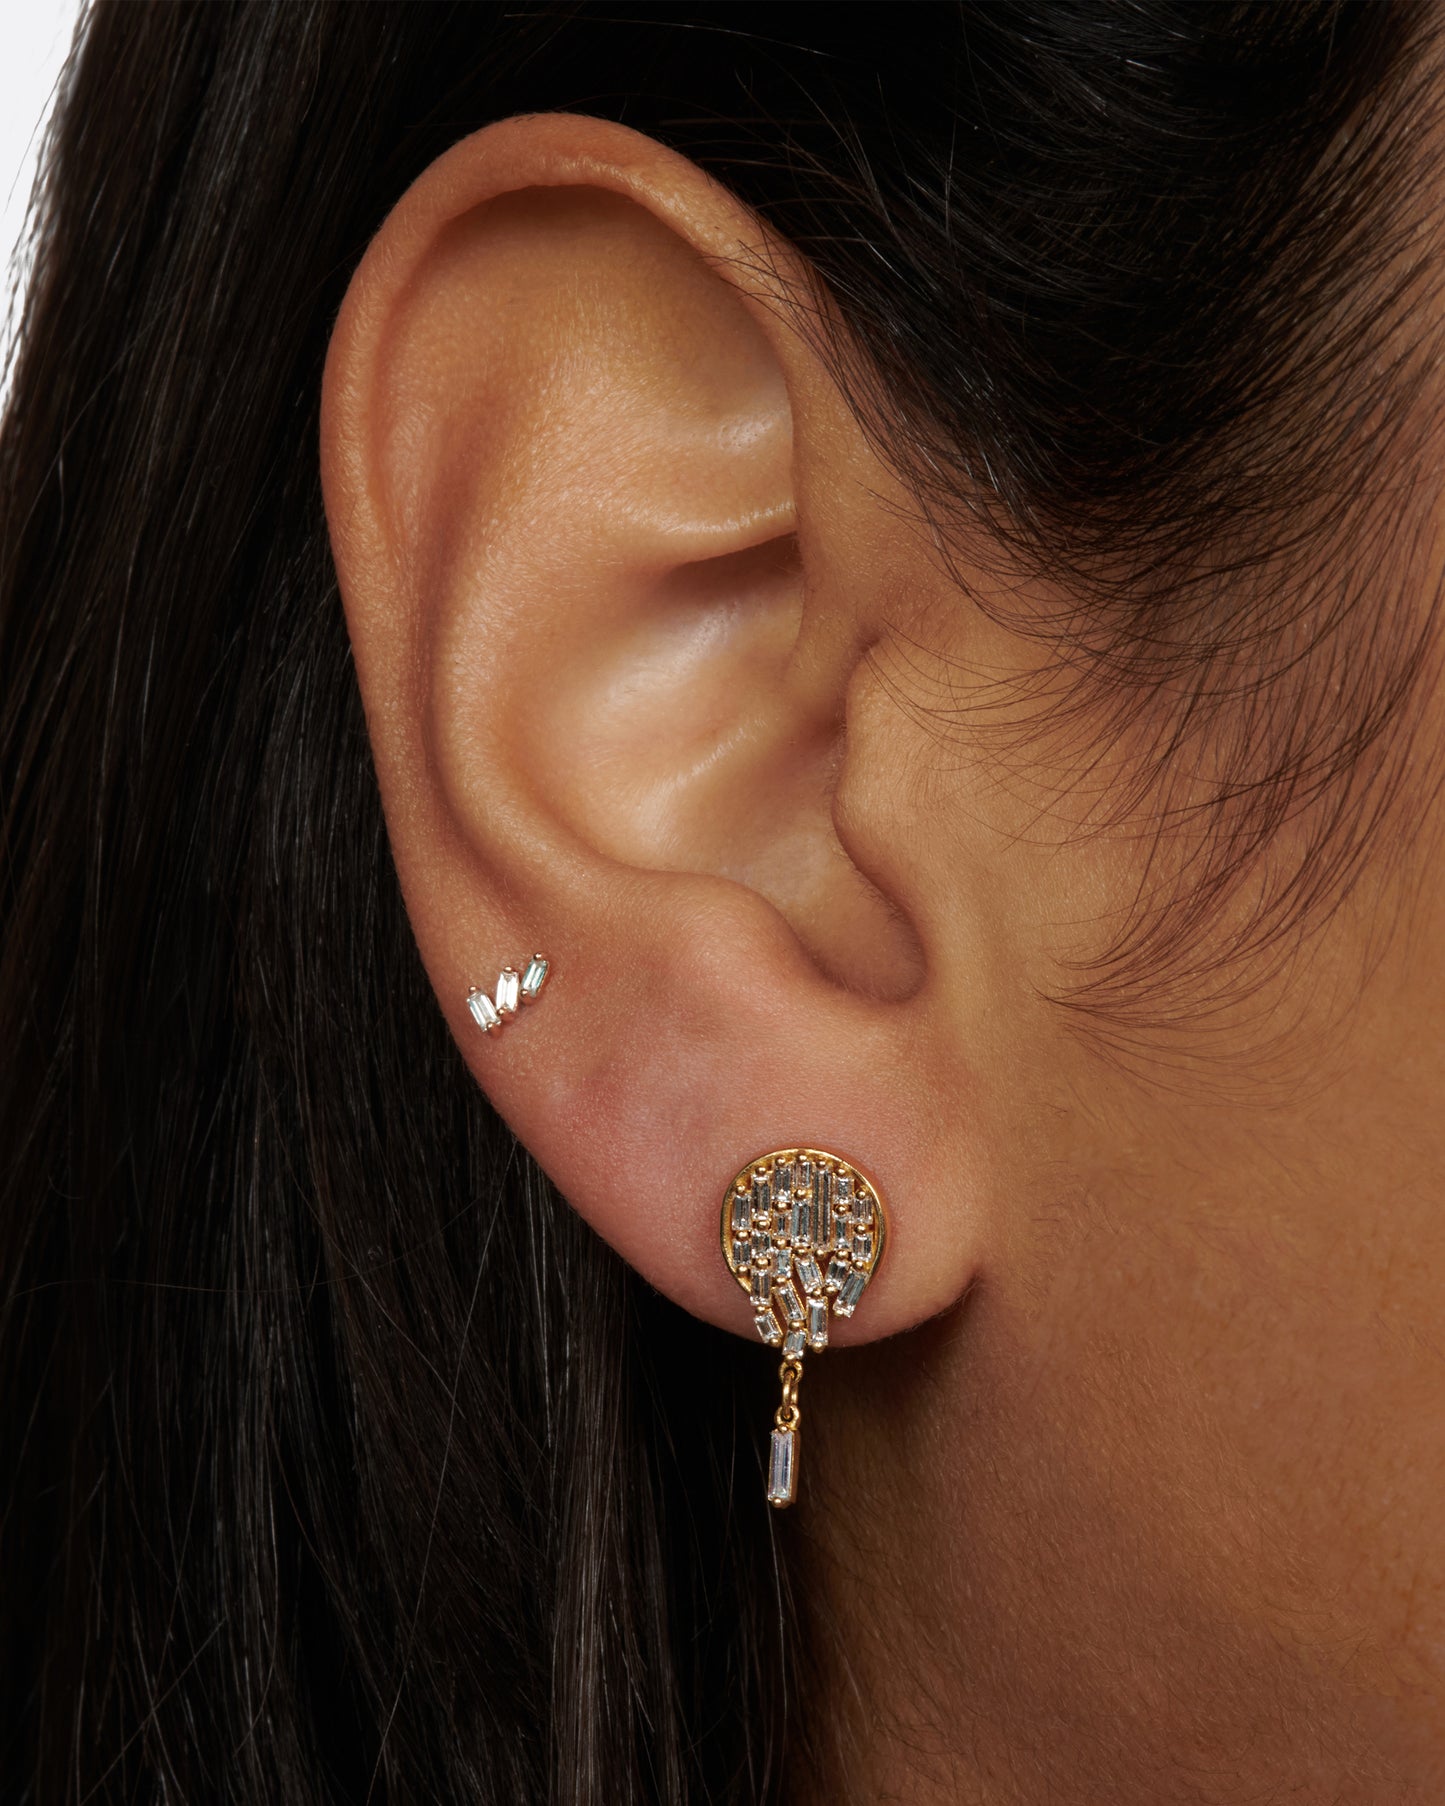 A pair of round stud earrings dripping with diamond baguettes.